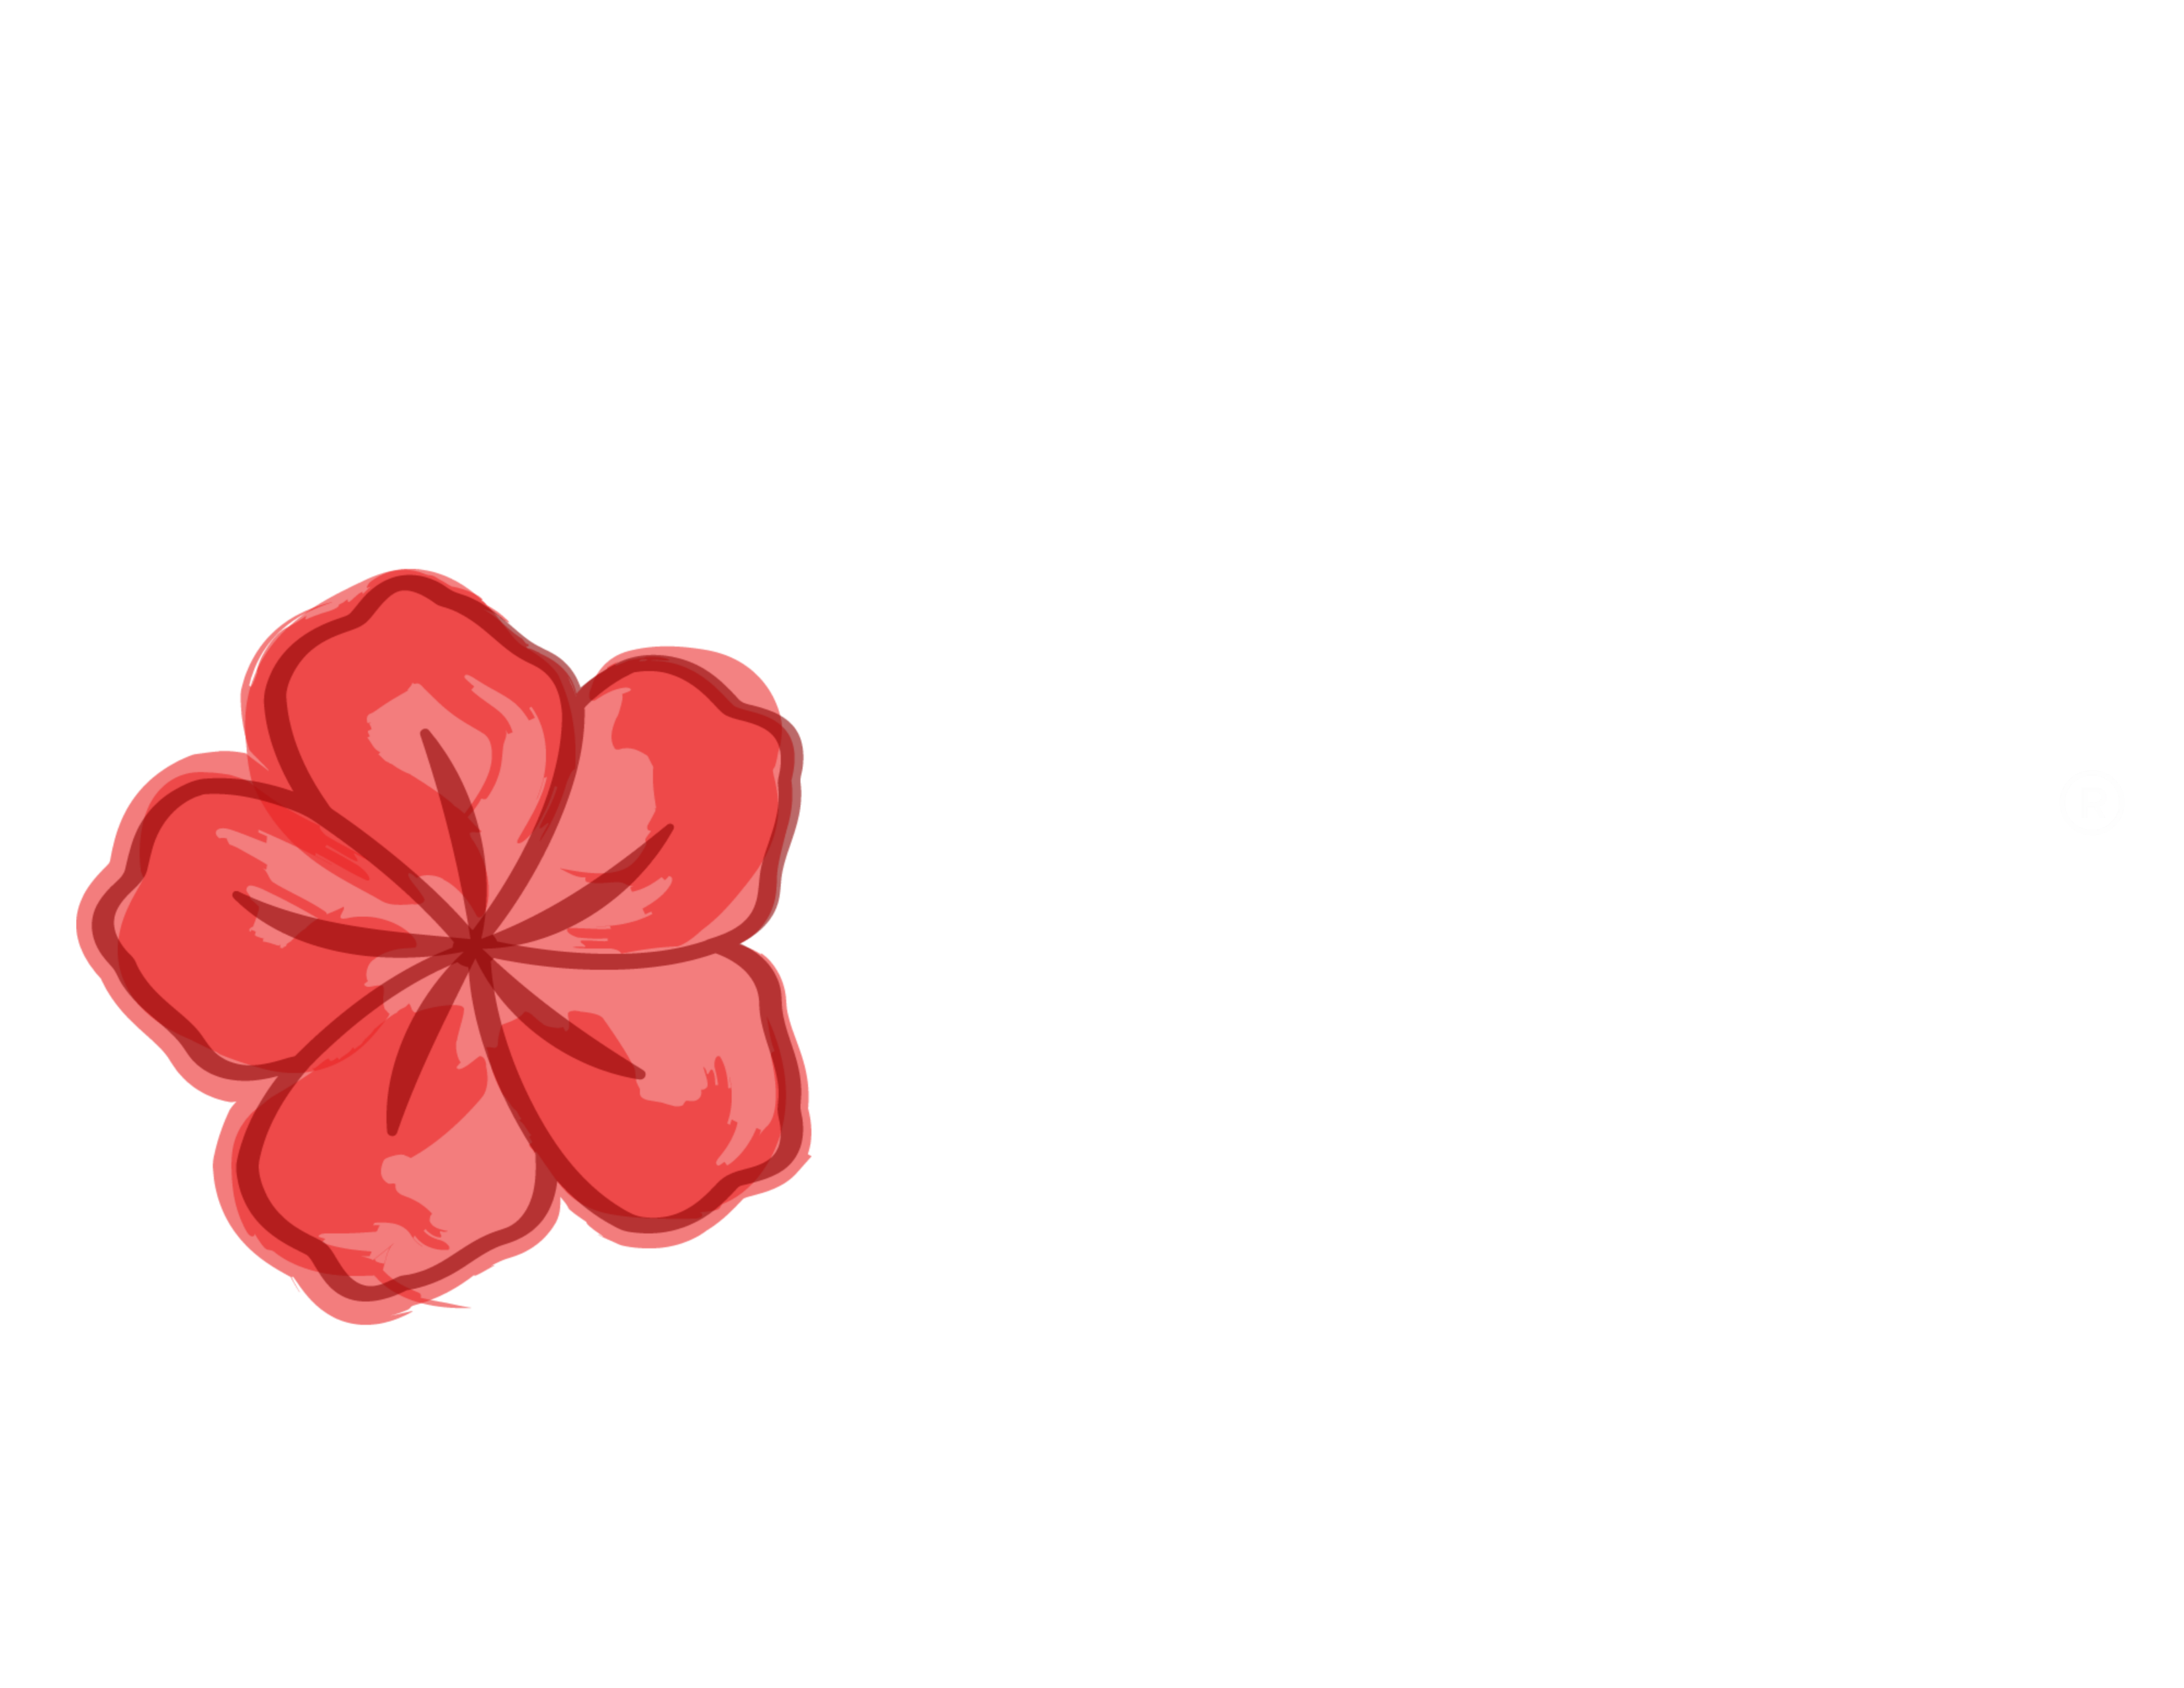 Red Petunia Productions